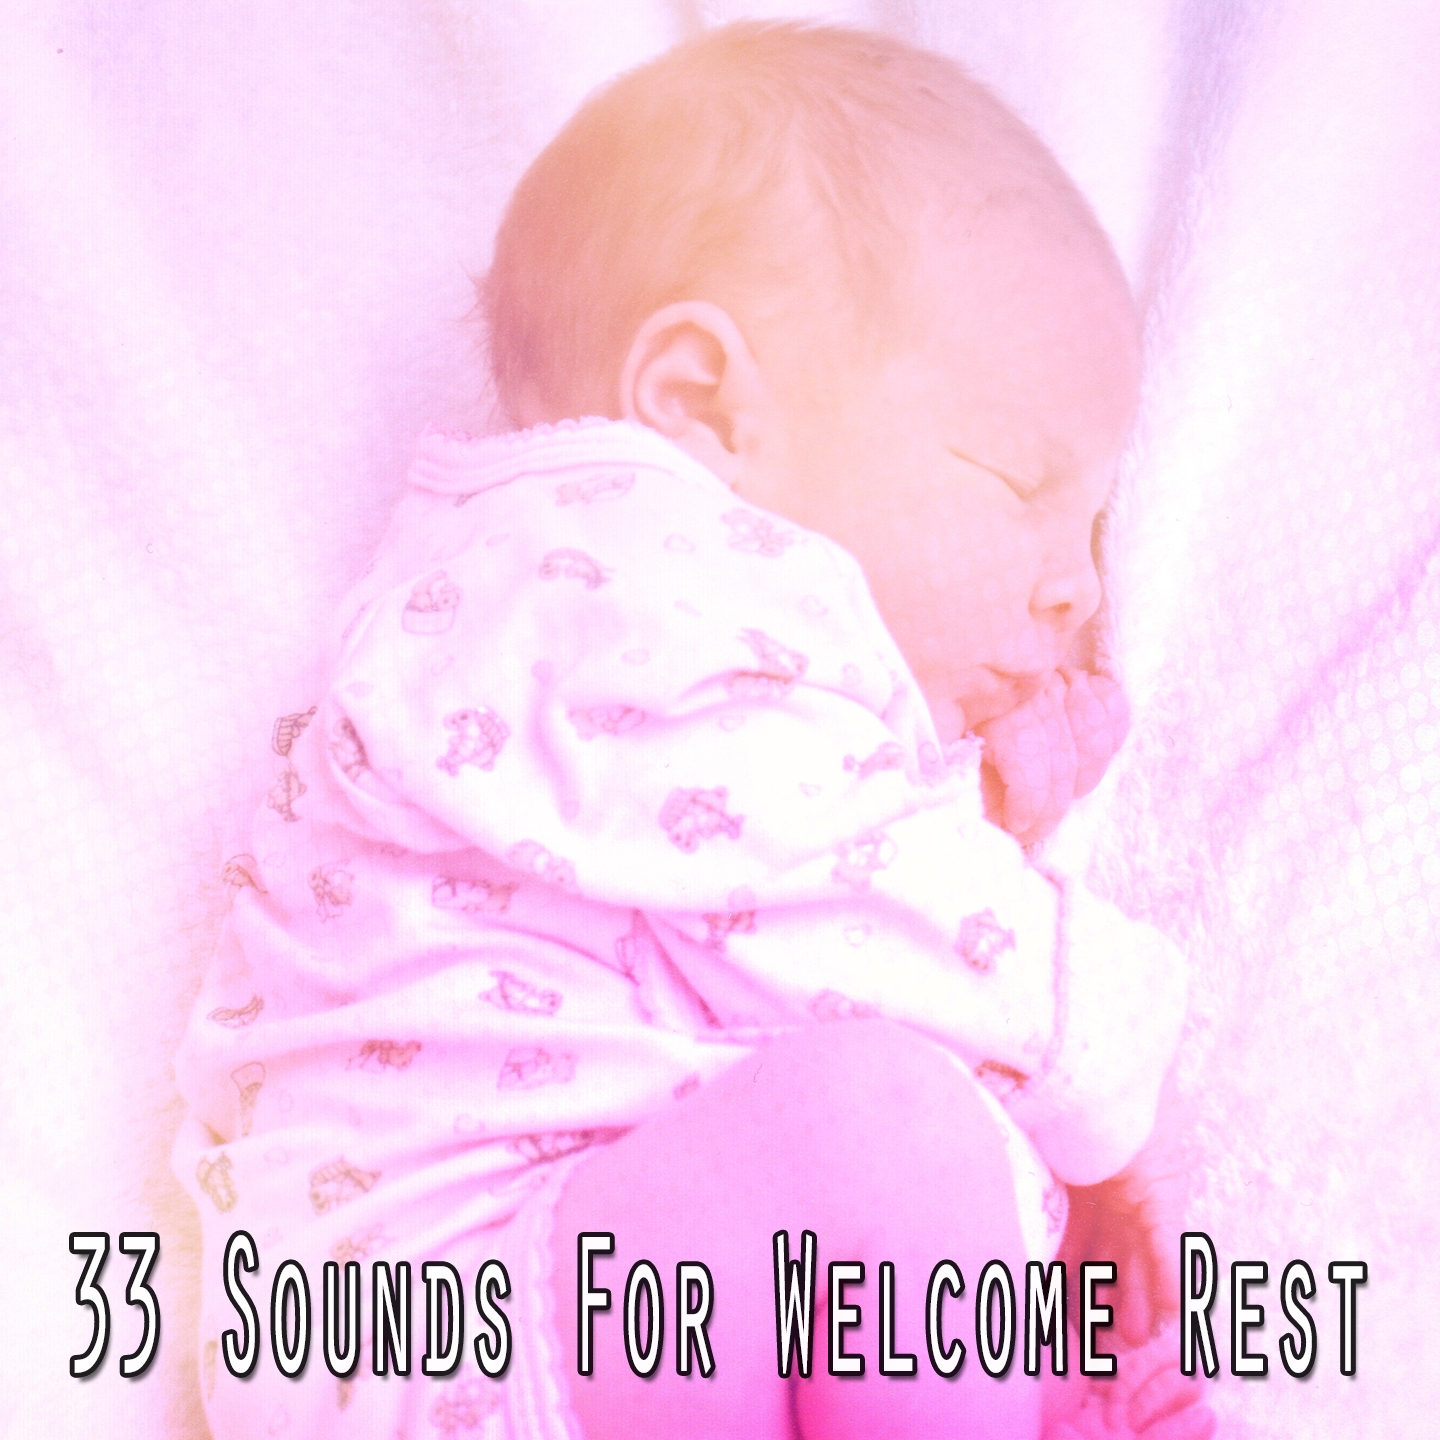 33 Sounds For Welcome Rest